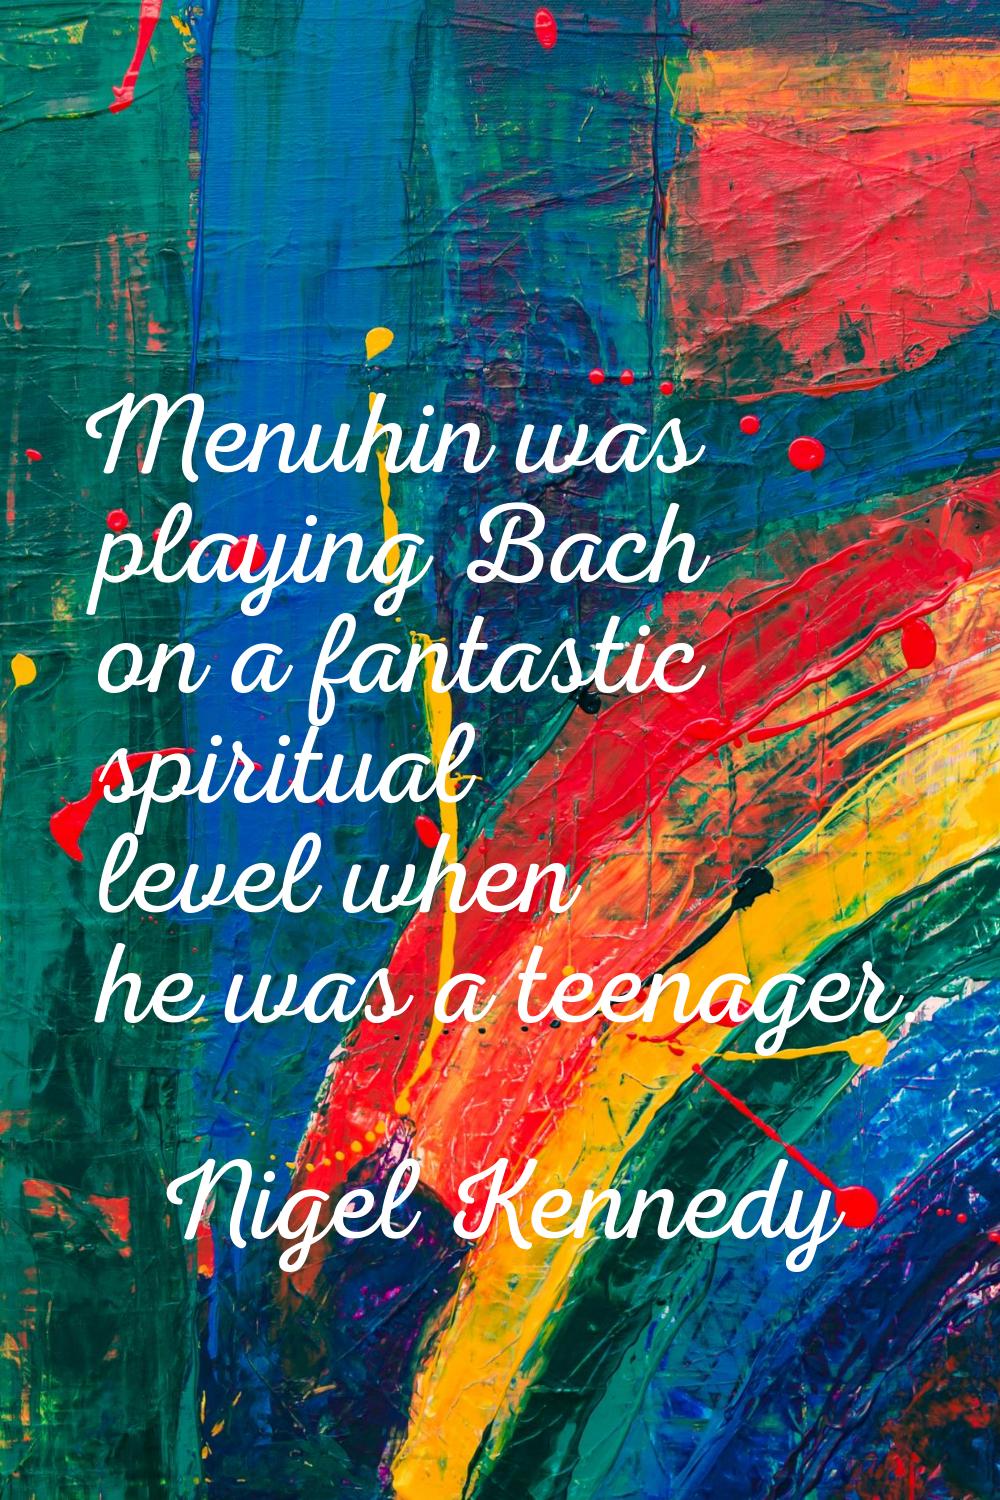 Menuhin was playing Bach on a fantastic spiritual level when he was a teenager.